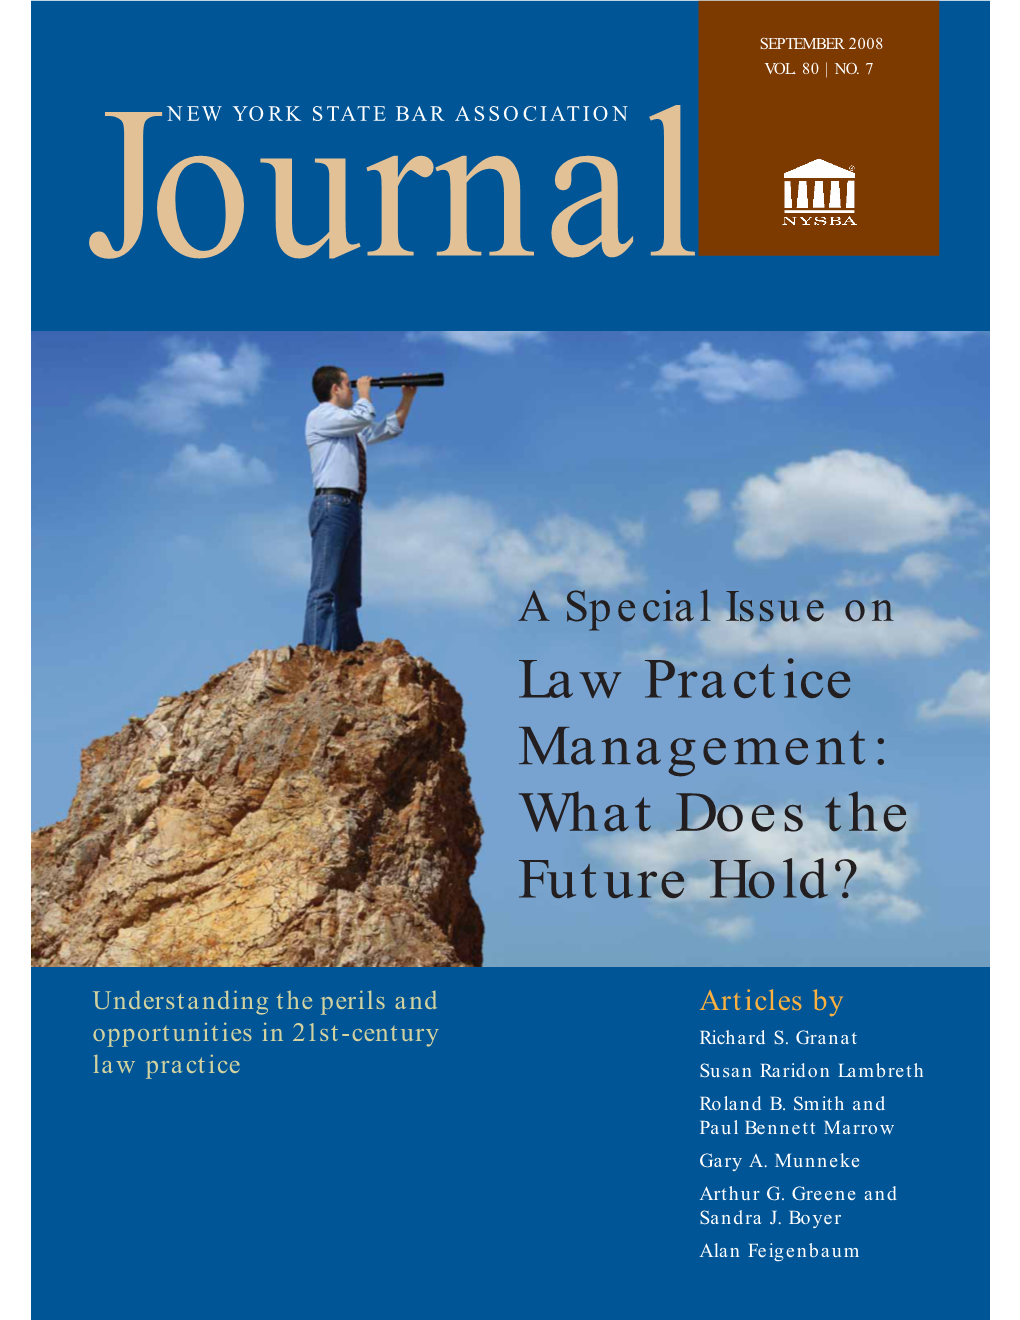 Law Practice Management: What Does the Future Hold?